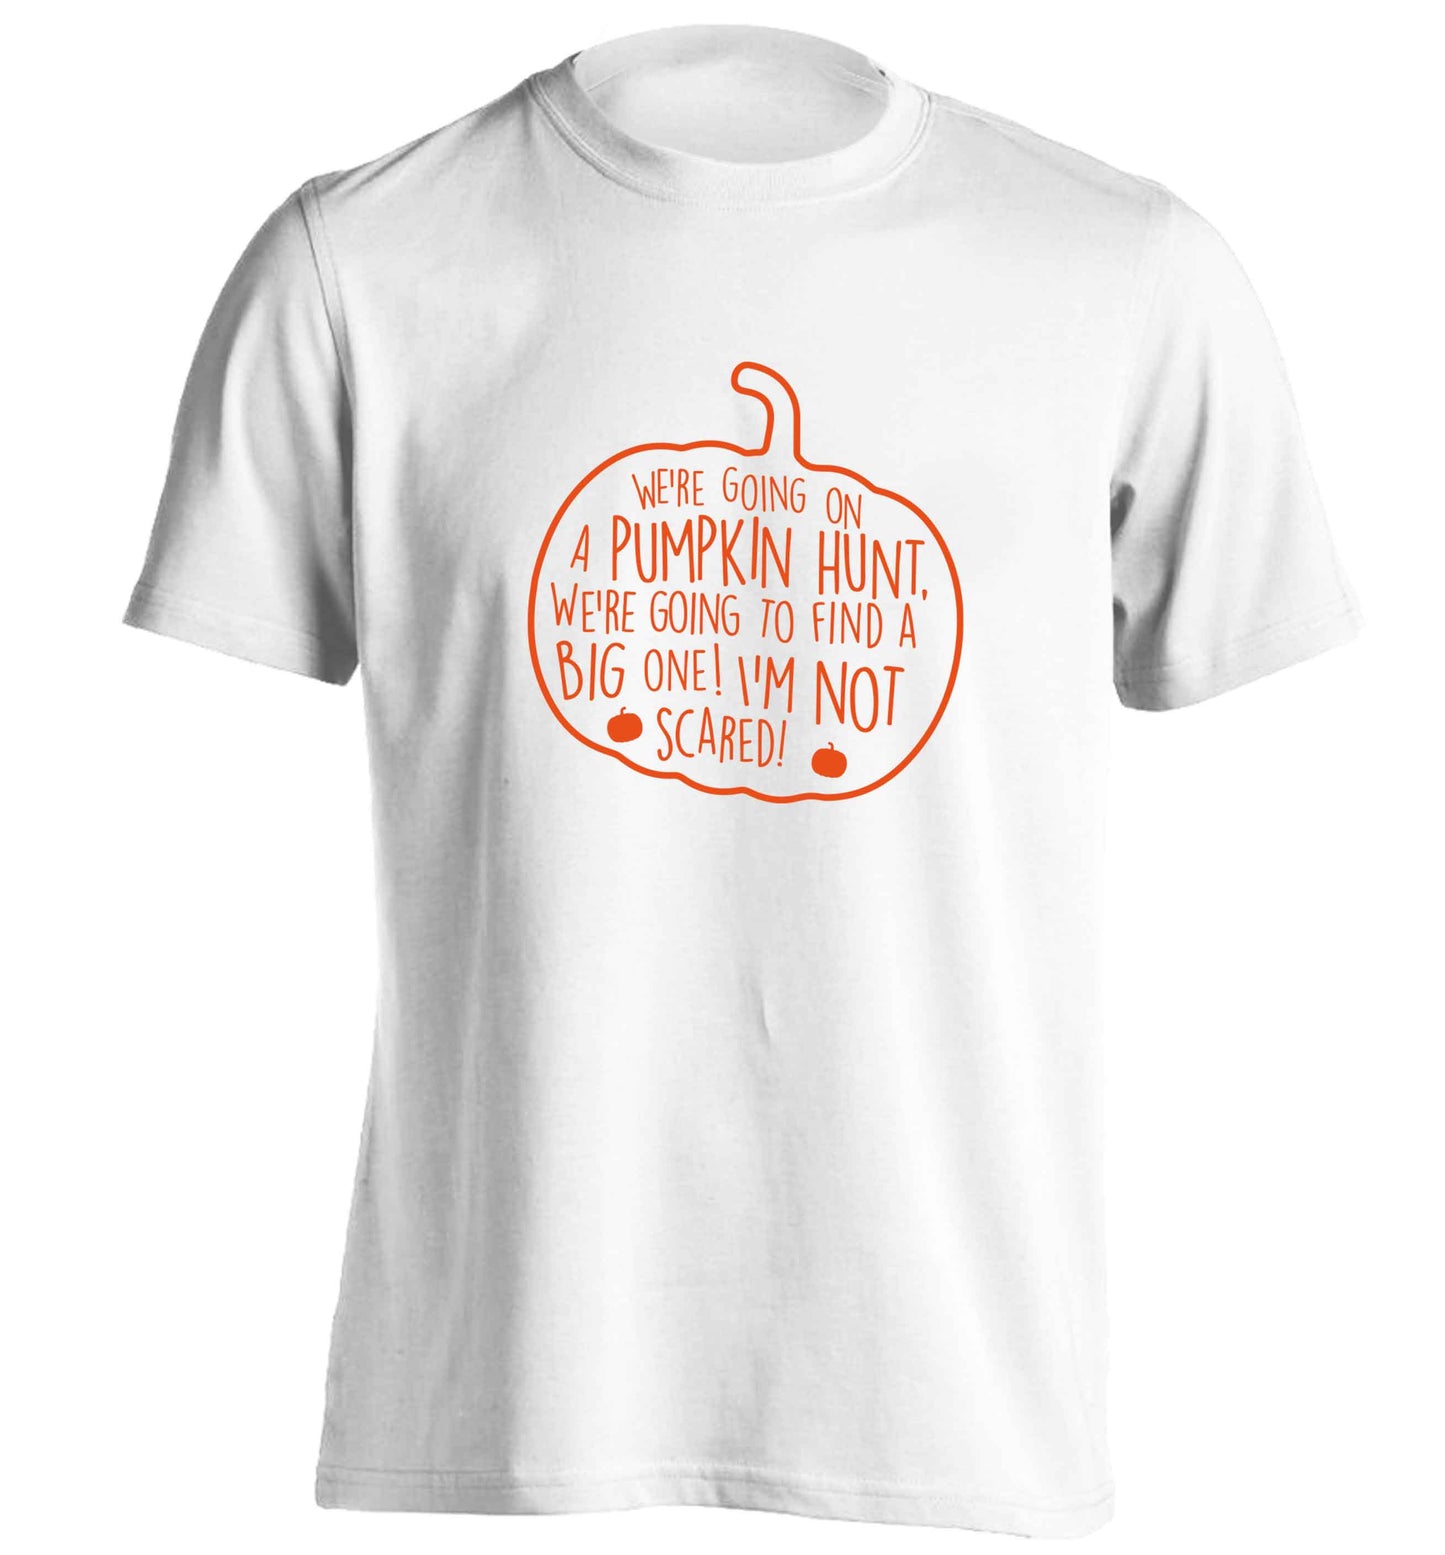 We're going on a pumpkin hunt adults unisex white Tshirt 2XL